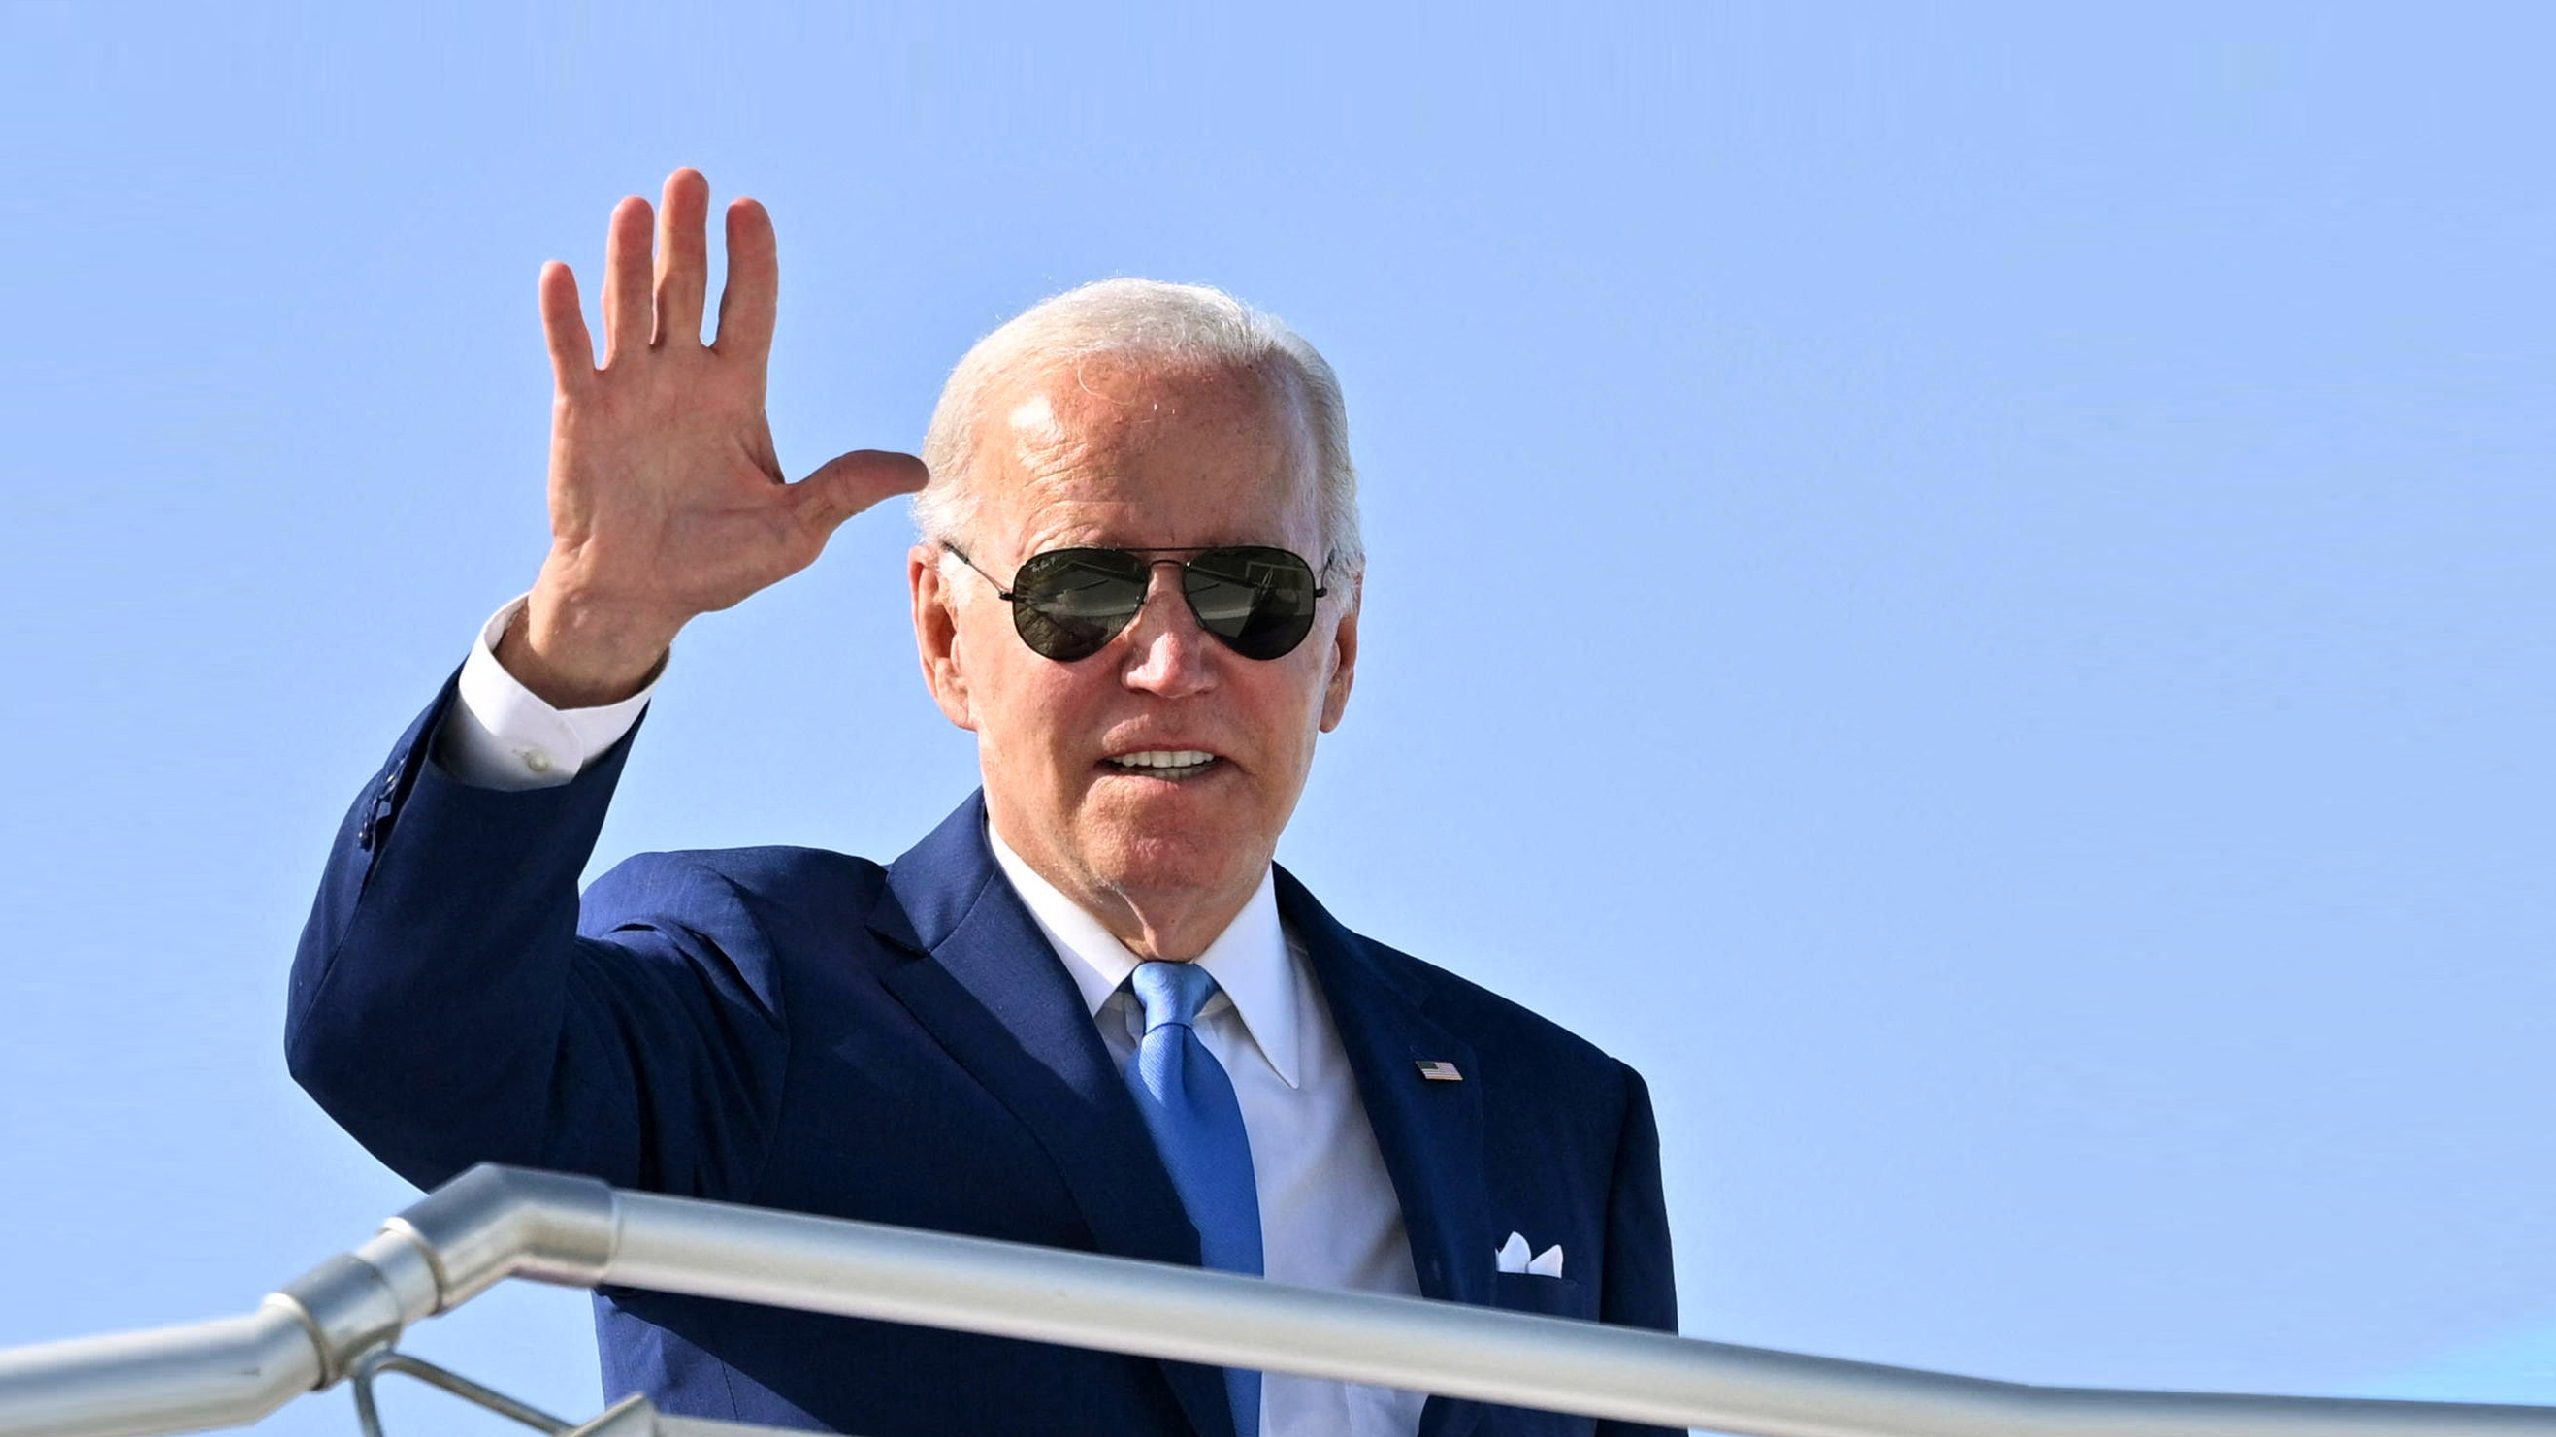 President Biden’s First Trip to the Middle East Produces Mixed Results